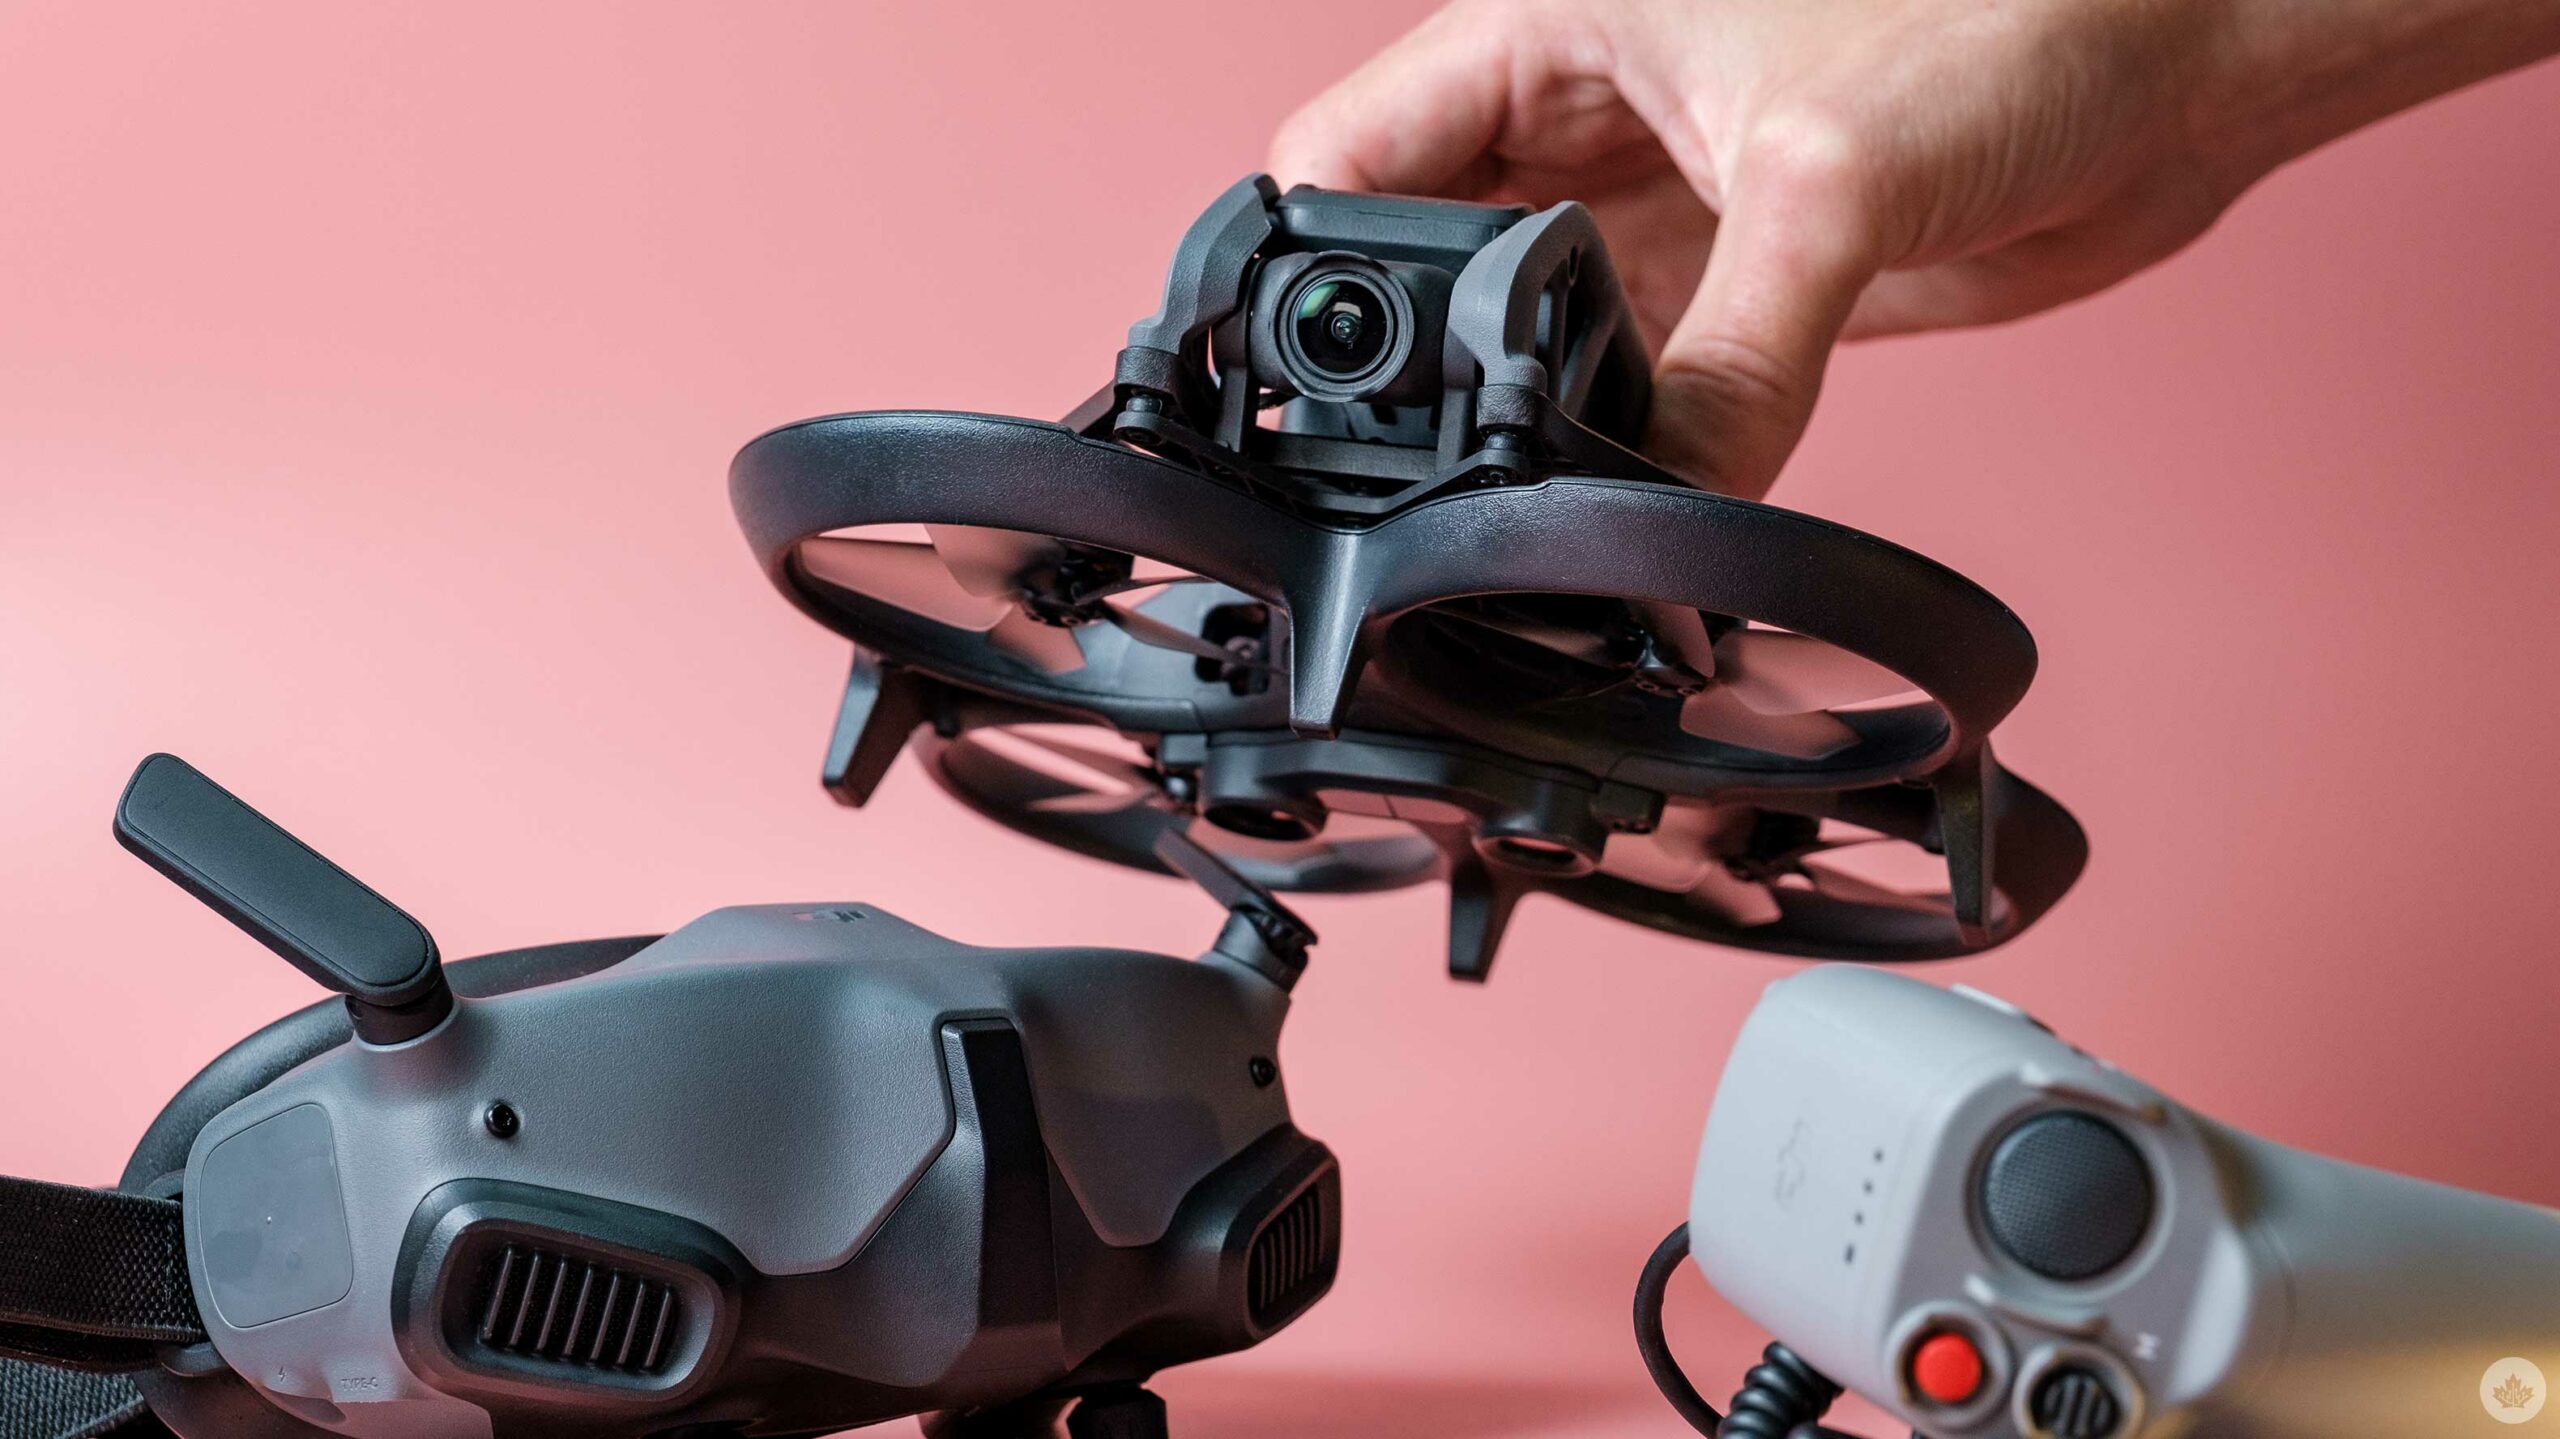 The new DJI Avata costs between $819 and $1,809 in Canada